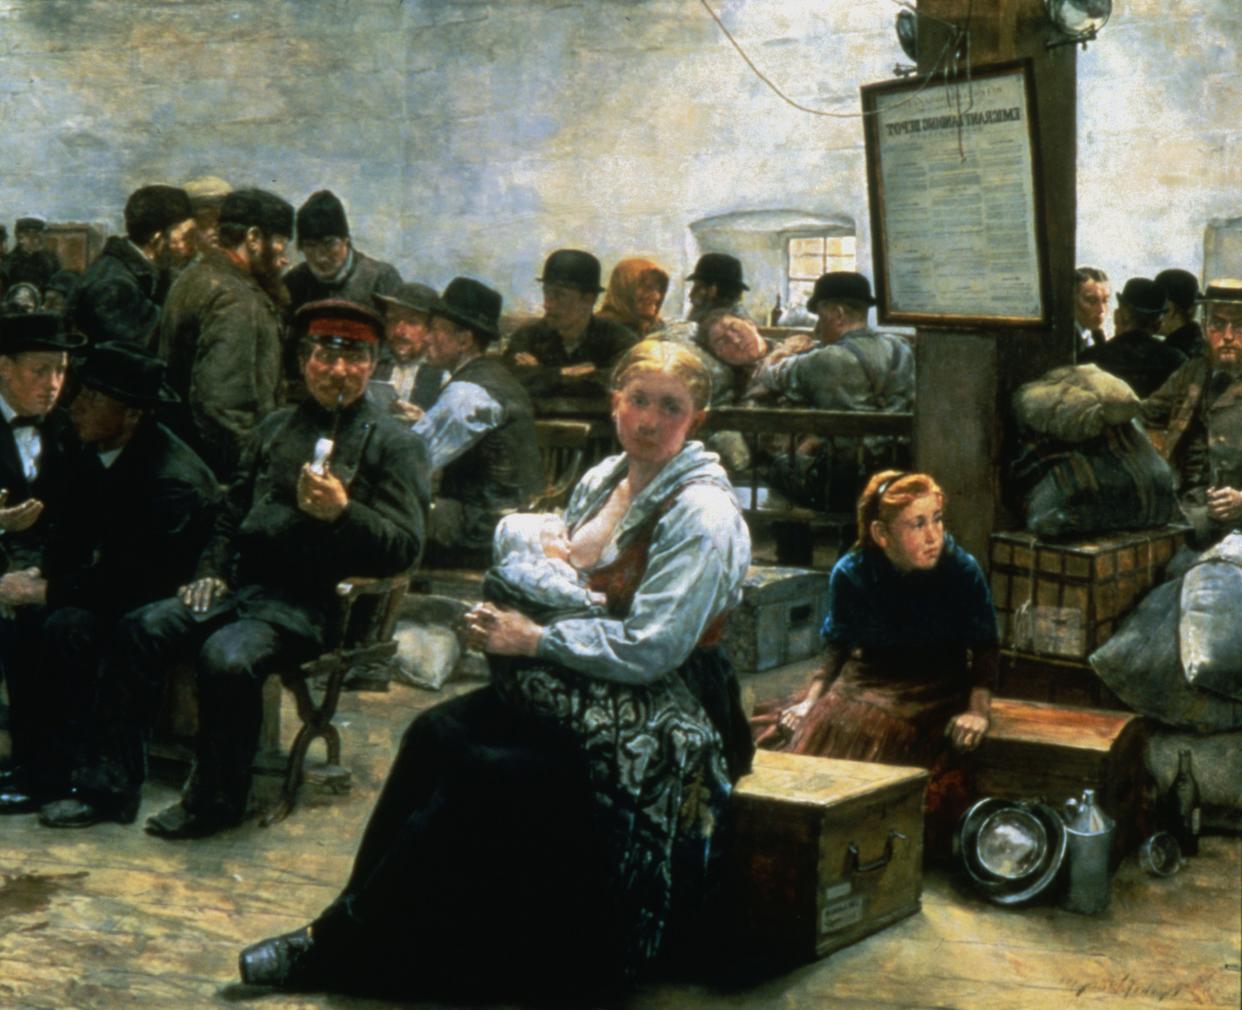 The Land of Promise, an 1884 painting by Charles Frederic Ulrich, shows a woman breastfeeding as newly arrived immigrants to the U.S. wait to be processed. (Photo: Photo12/Universal Images Group via Getty Images)